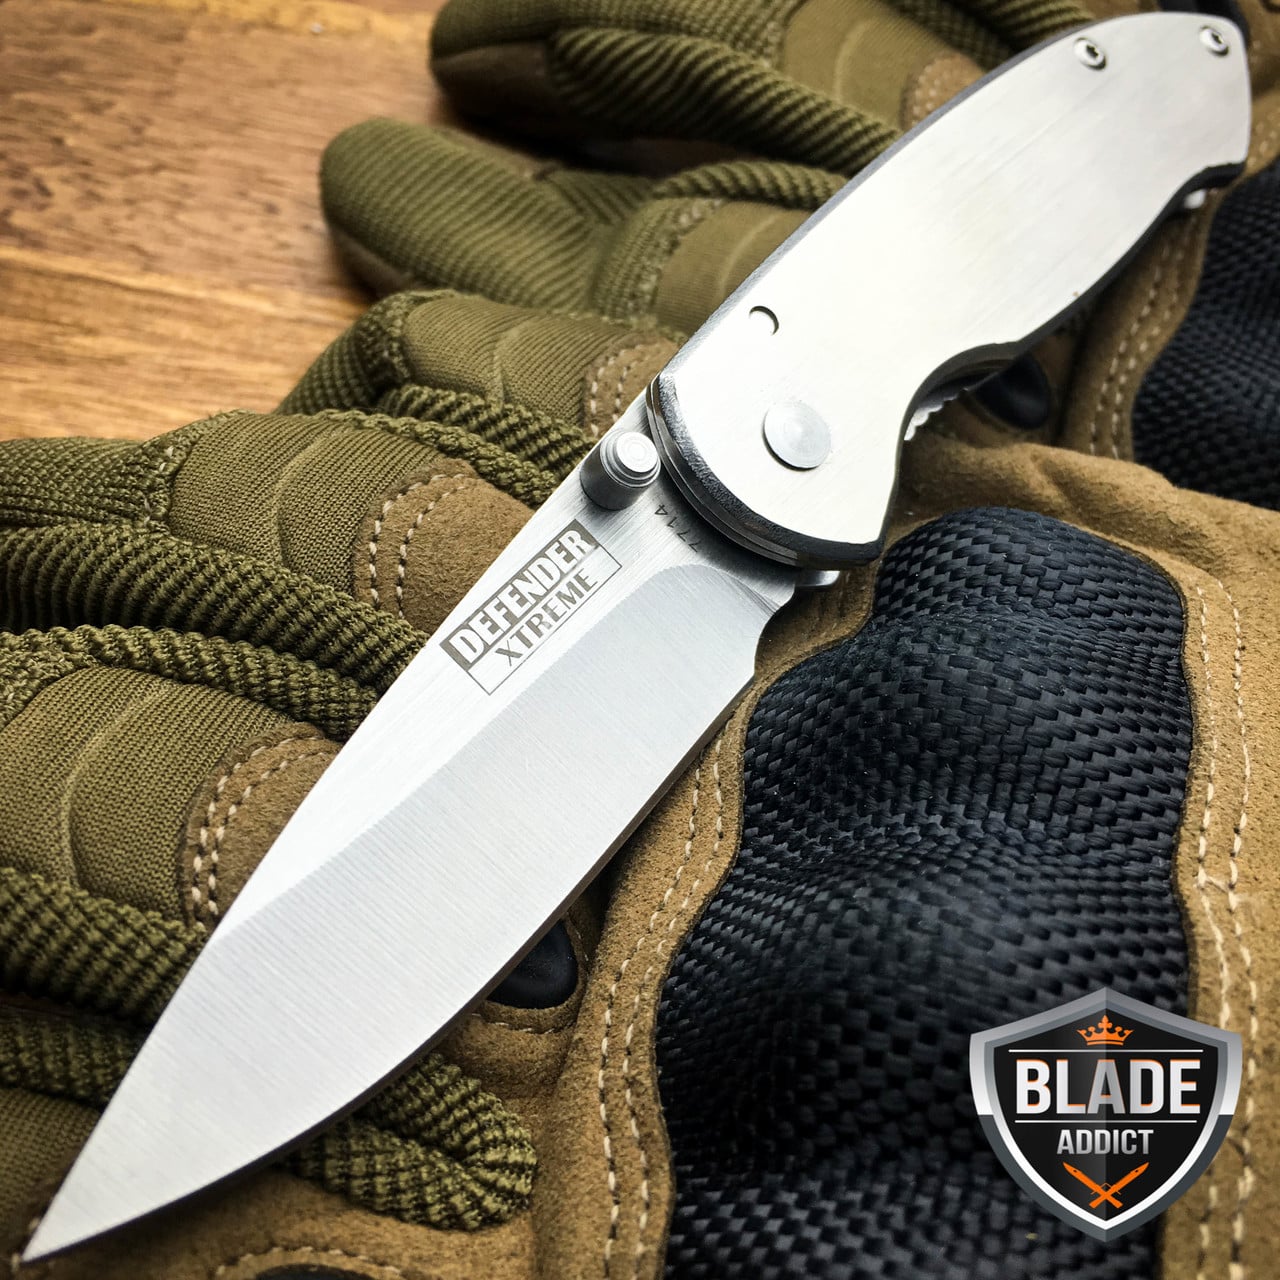 6.5" FULL STAINLESS STEEL TACTICAL COMBAT SPRING ASSISTED OPEN POCKET KNIFE EDC